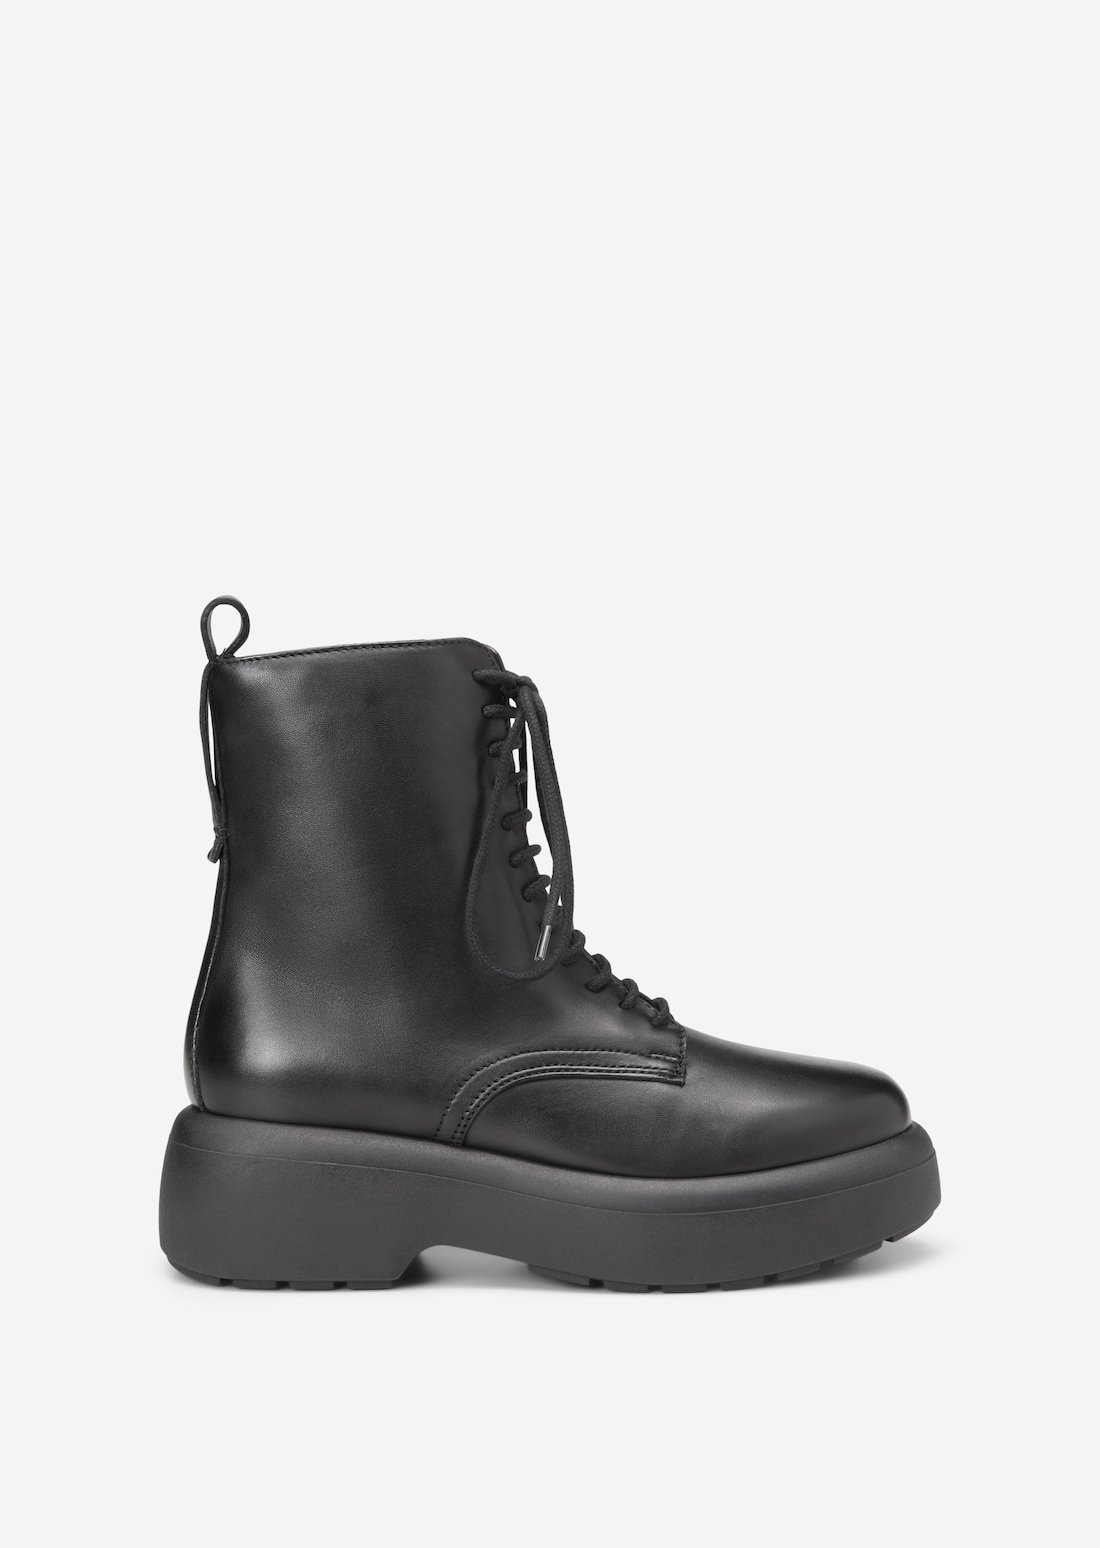 Lace up boots from smooth calfskin - black | Lace-up boots | MARC O’POLO